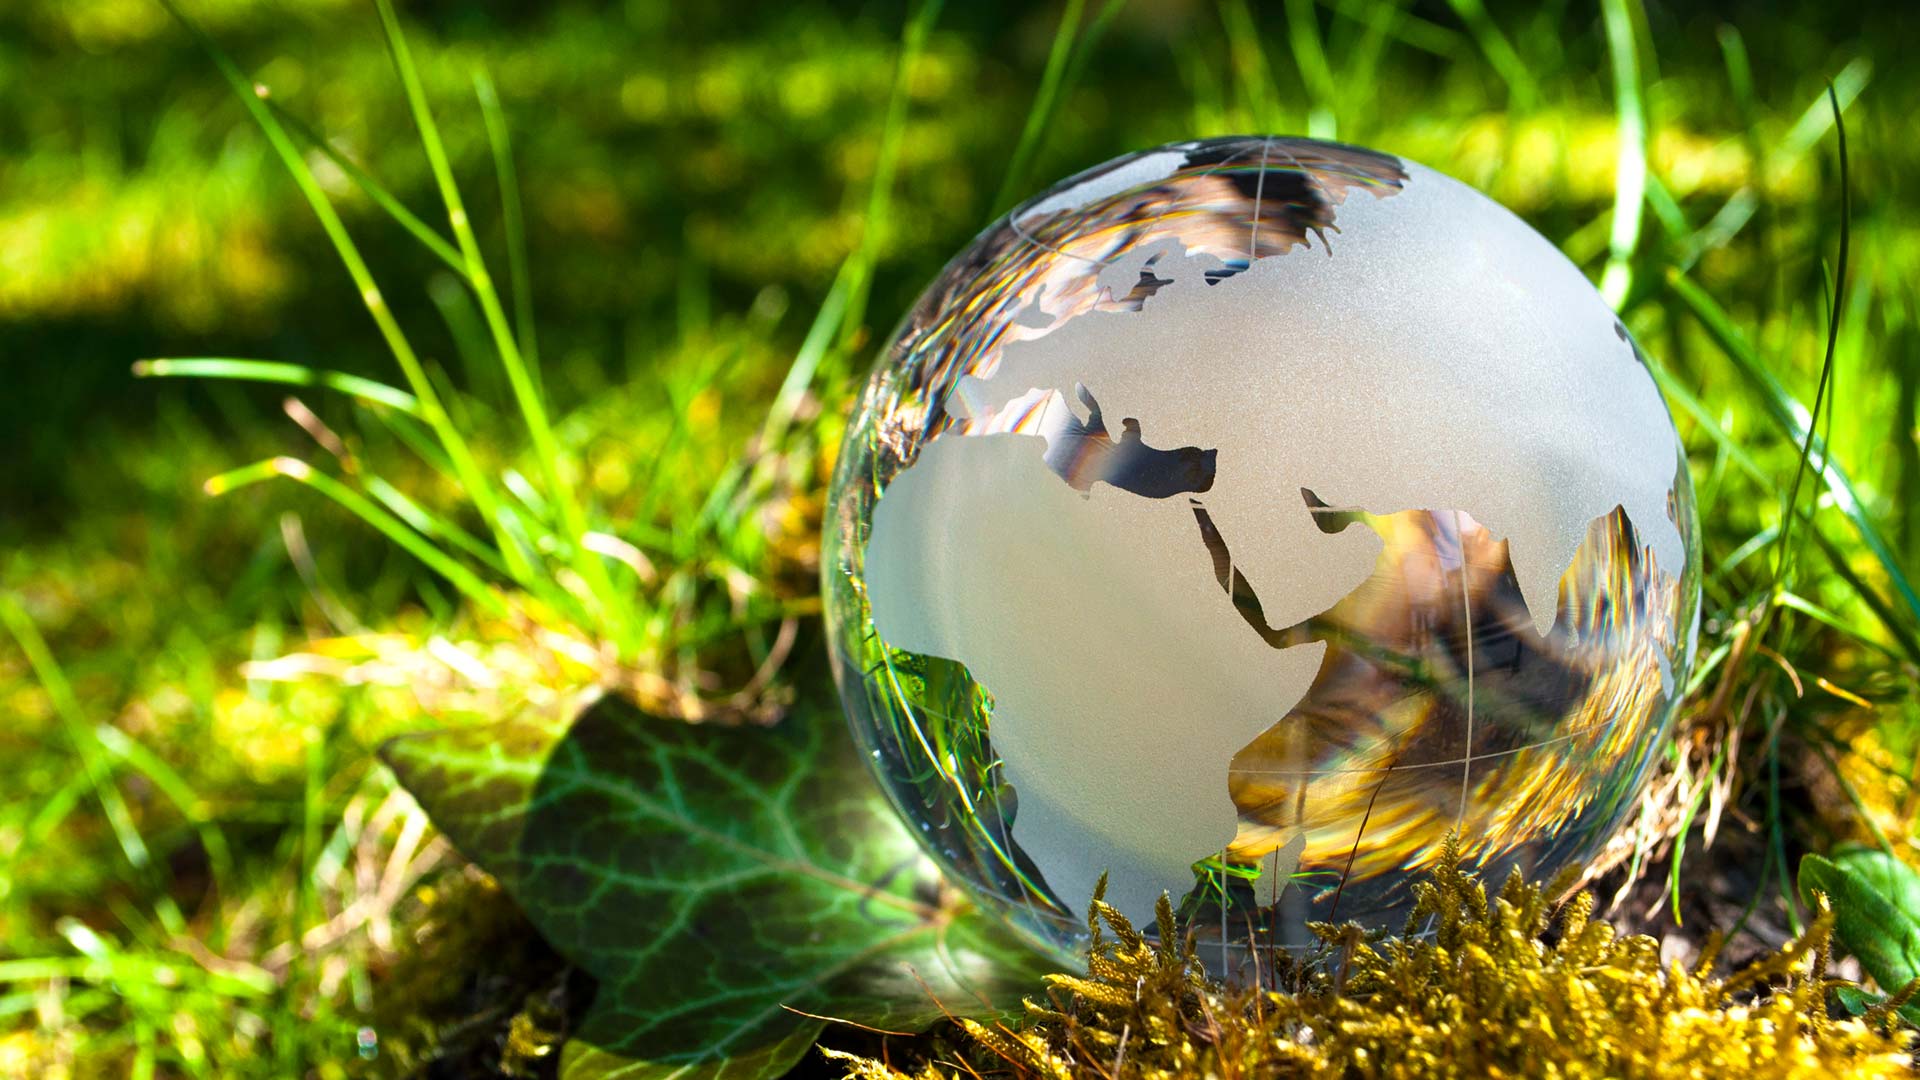 Glass globe sitting on plants and grass